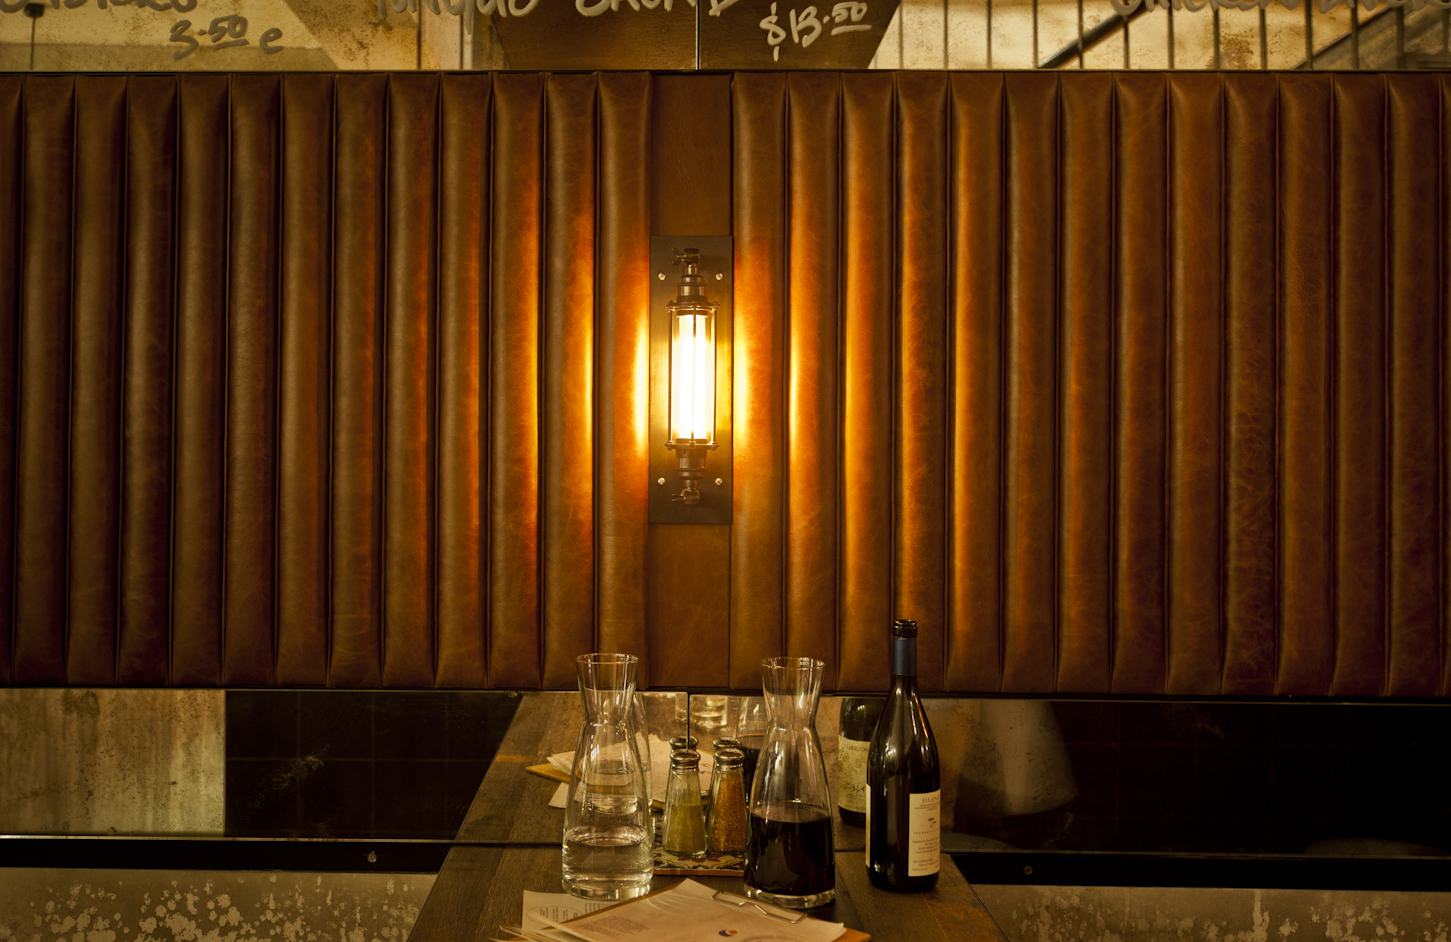 Grossi cafe Ombra using cage wall lamps